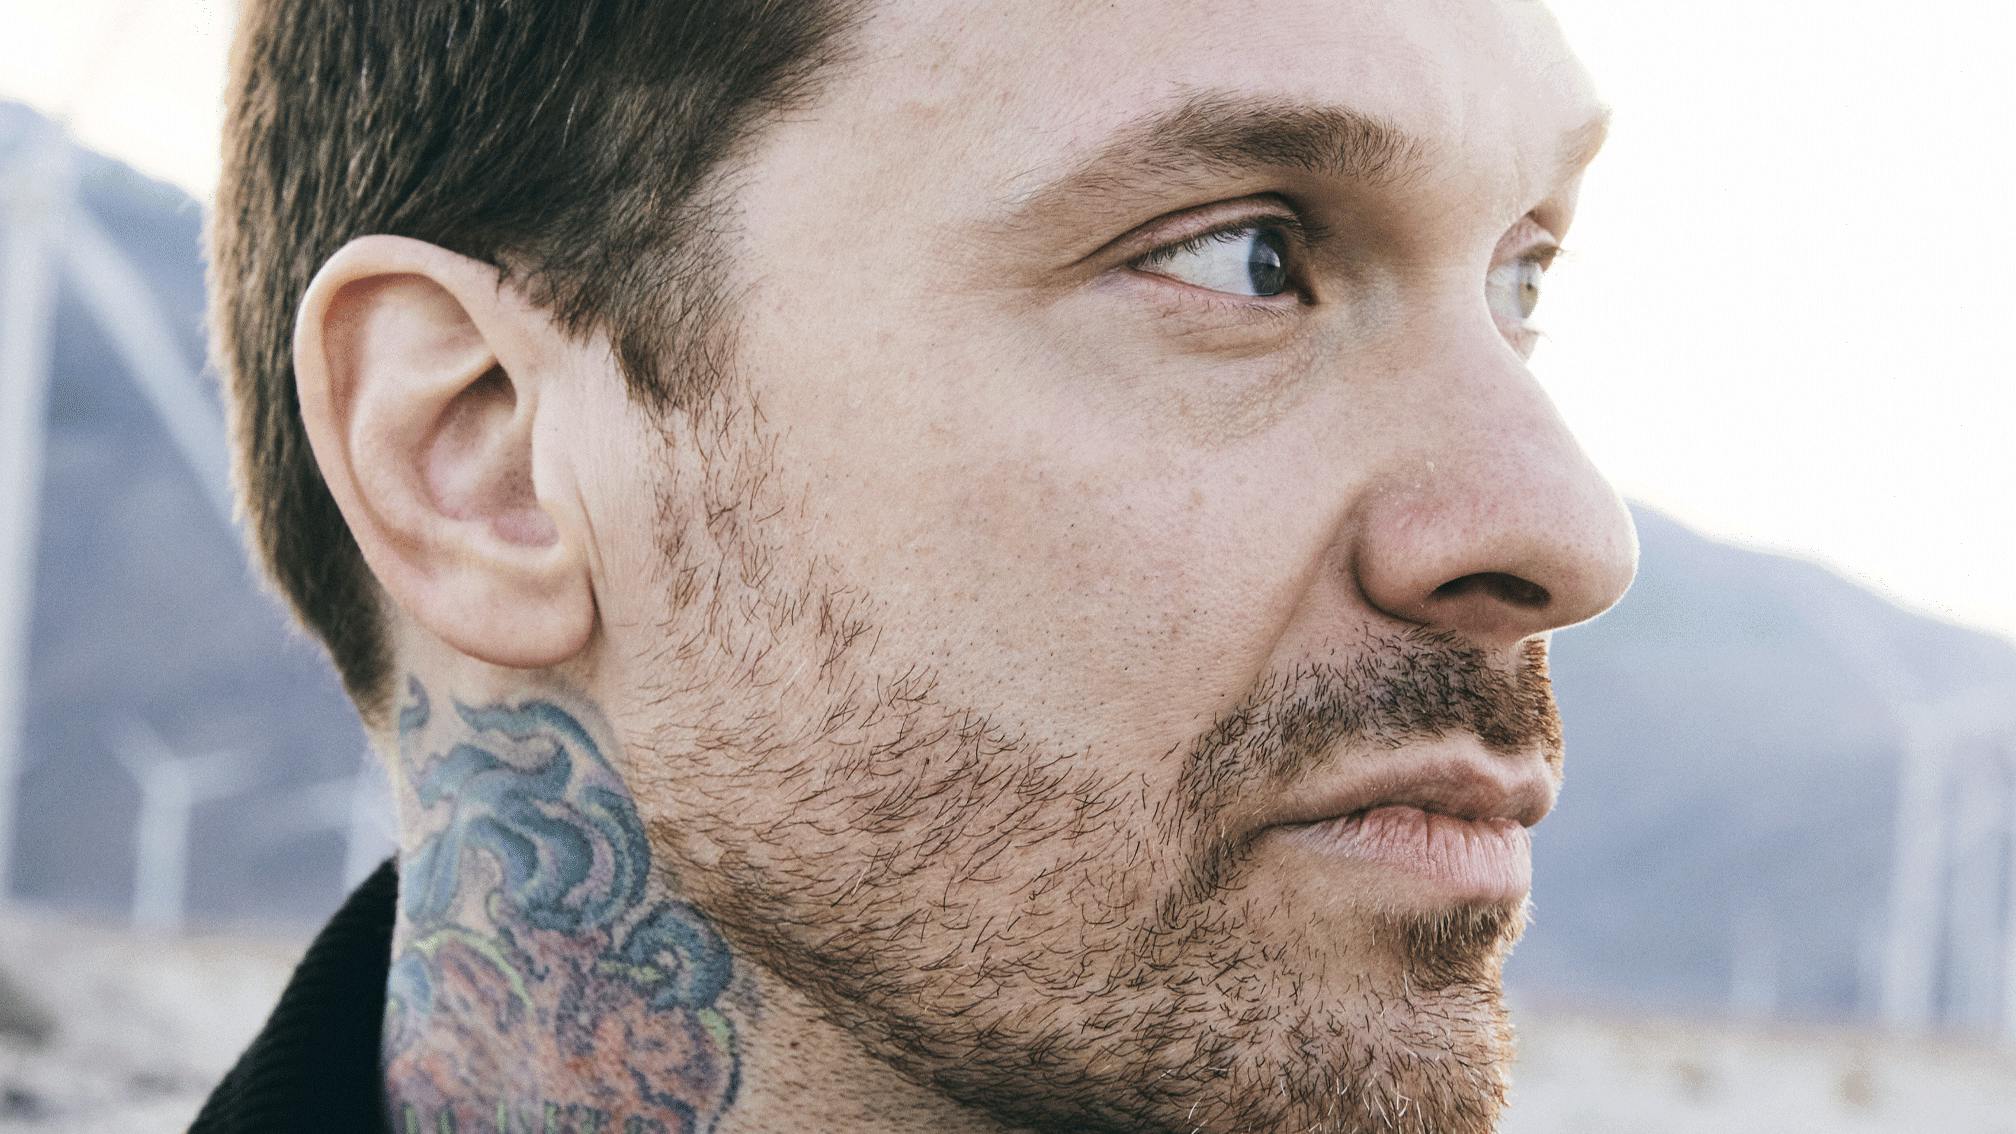 “Having no internet would remind you how precious life really is”: 13 Questions with Shinedown’s Brent Smith